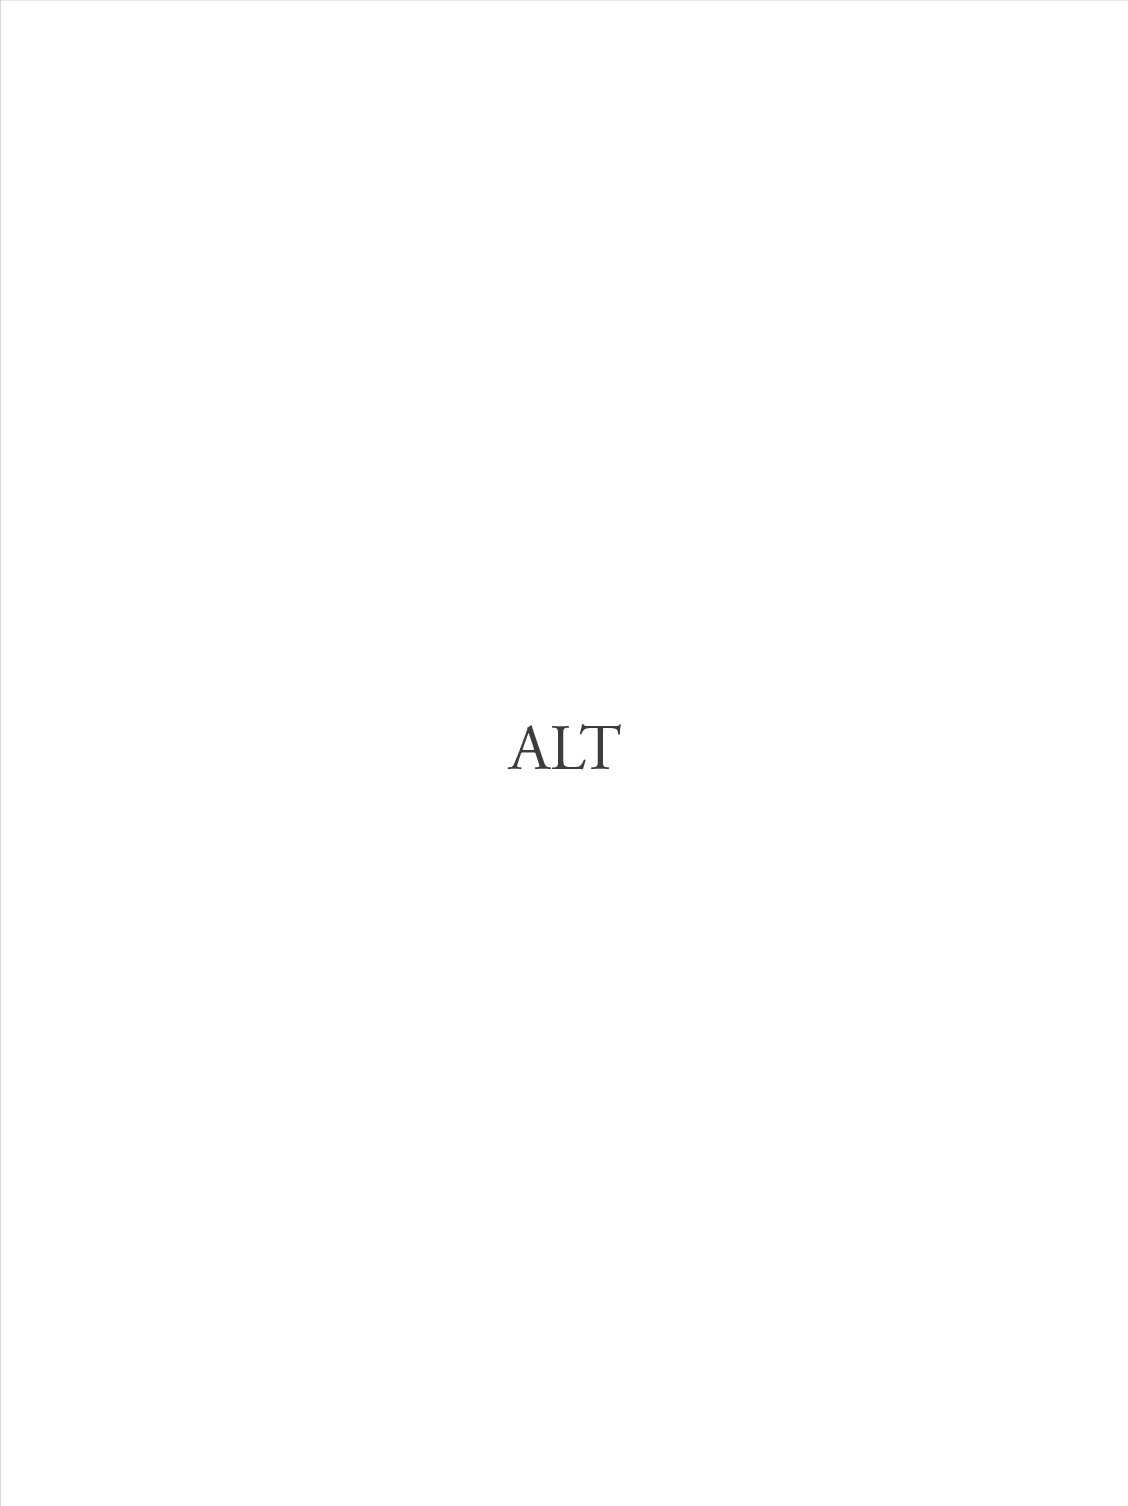 Book cover showing a white rectangle with the word ALT at the centre